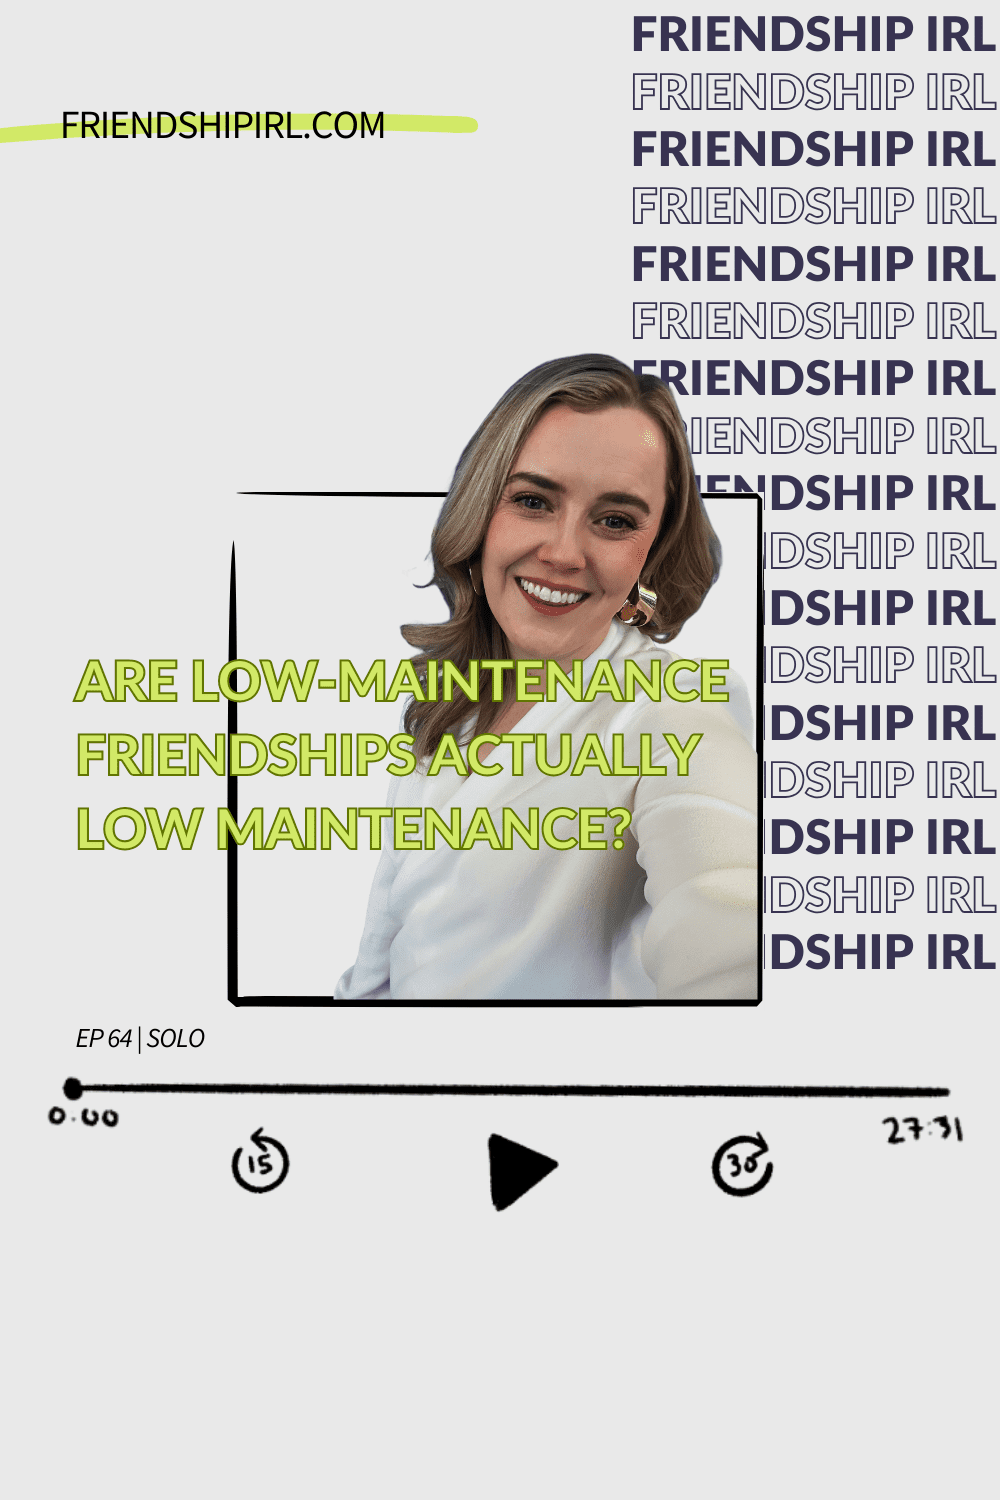 Friendship IRL Podcast - Episode 64 - Are Low Maintenance Friendships Actually Low Maintenance?